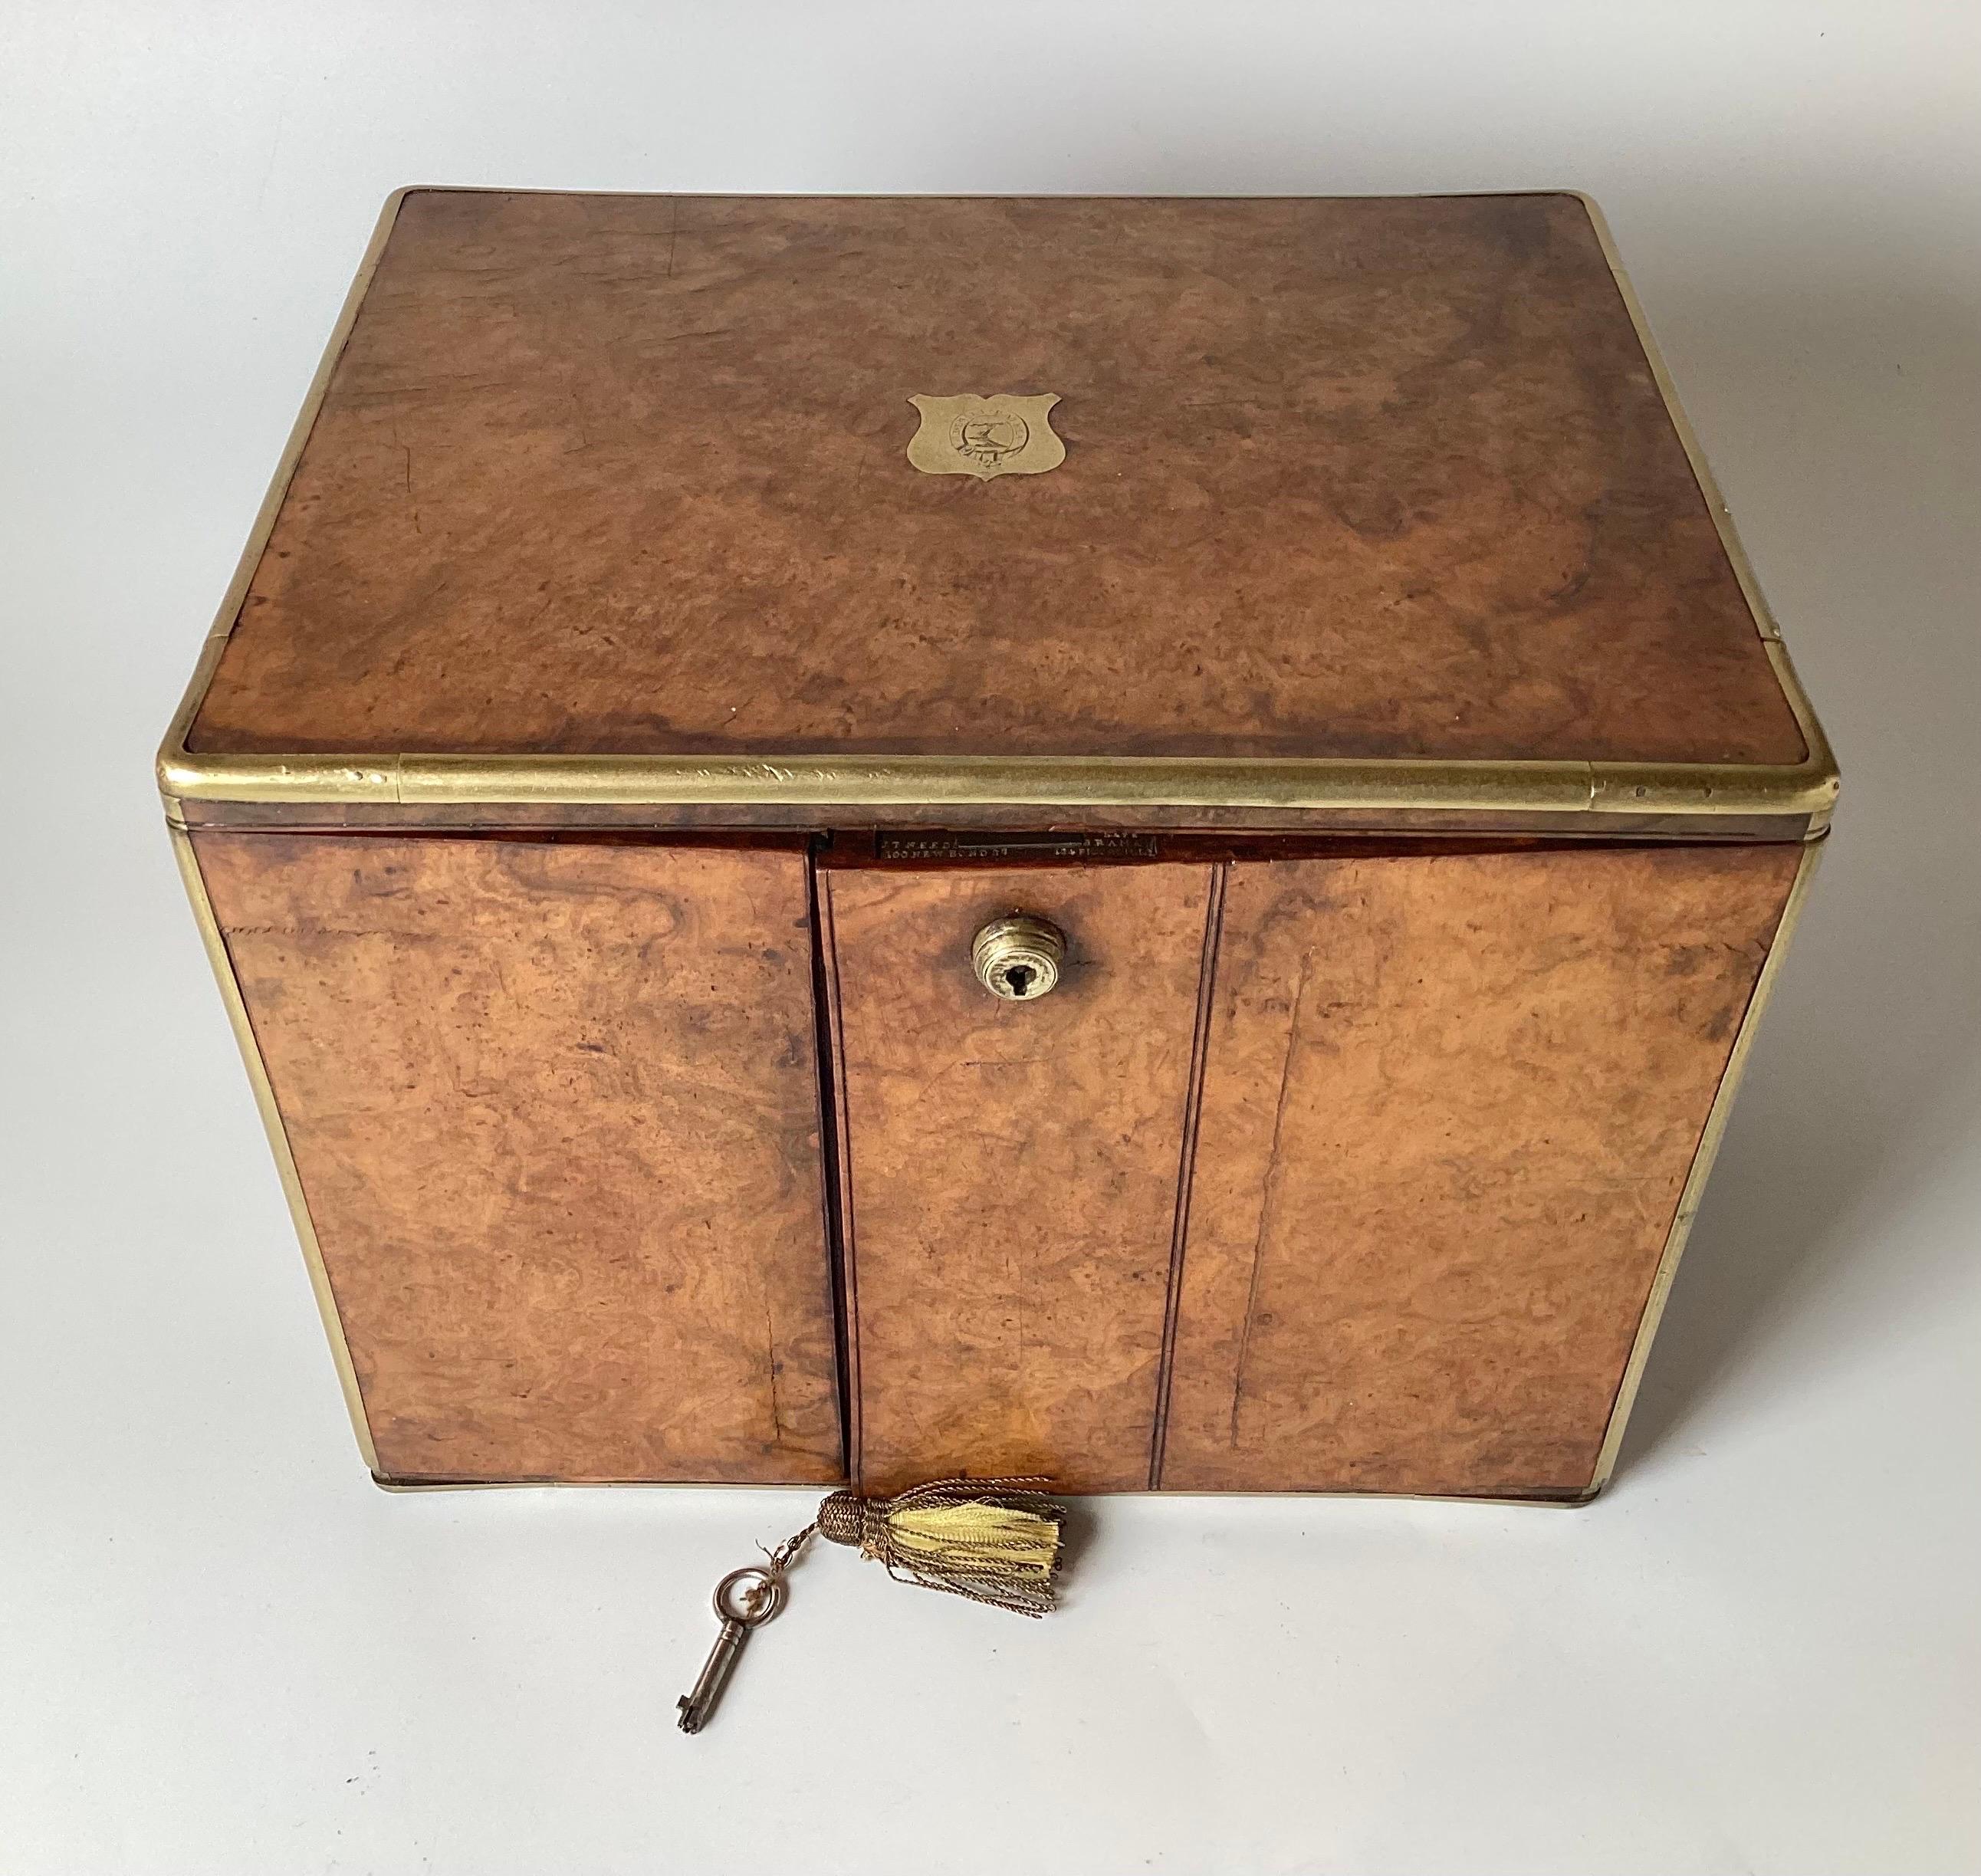 A diminutive table top campaign chest, cigar box. The walnut box with brass trim and handles with two doors that open to reveal two drawers with compartments. Working lock with key, with brass plaque engraved in Latin, translation 